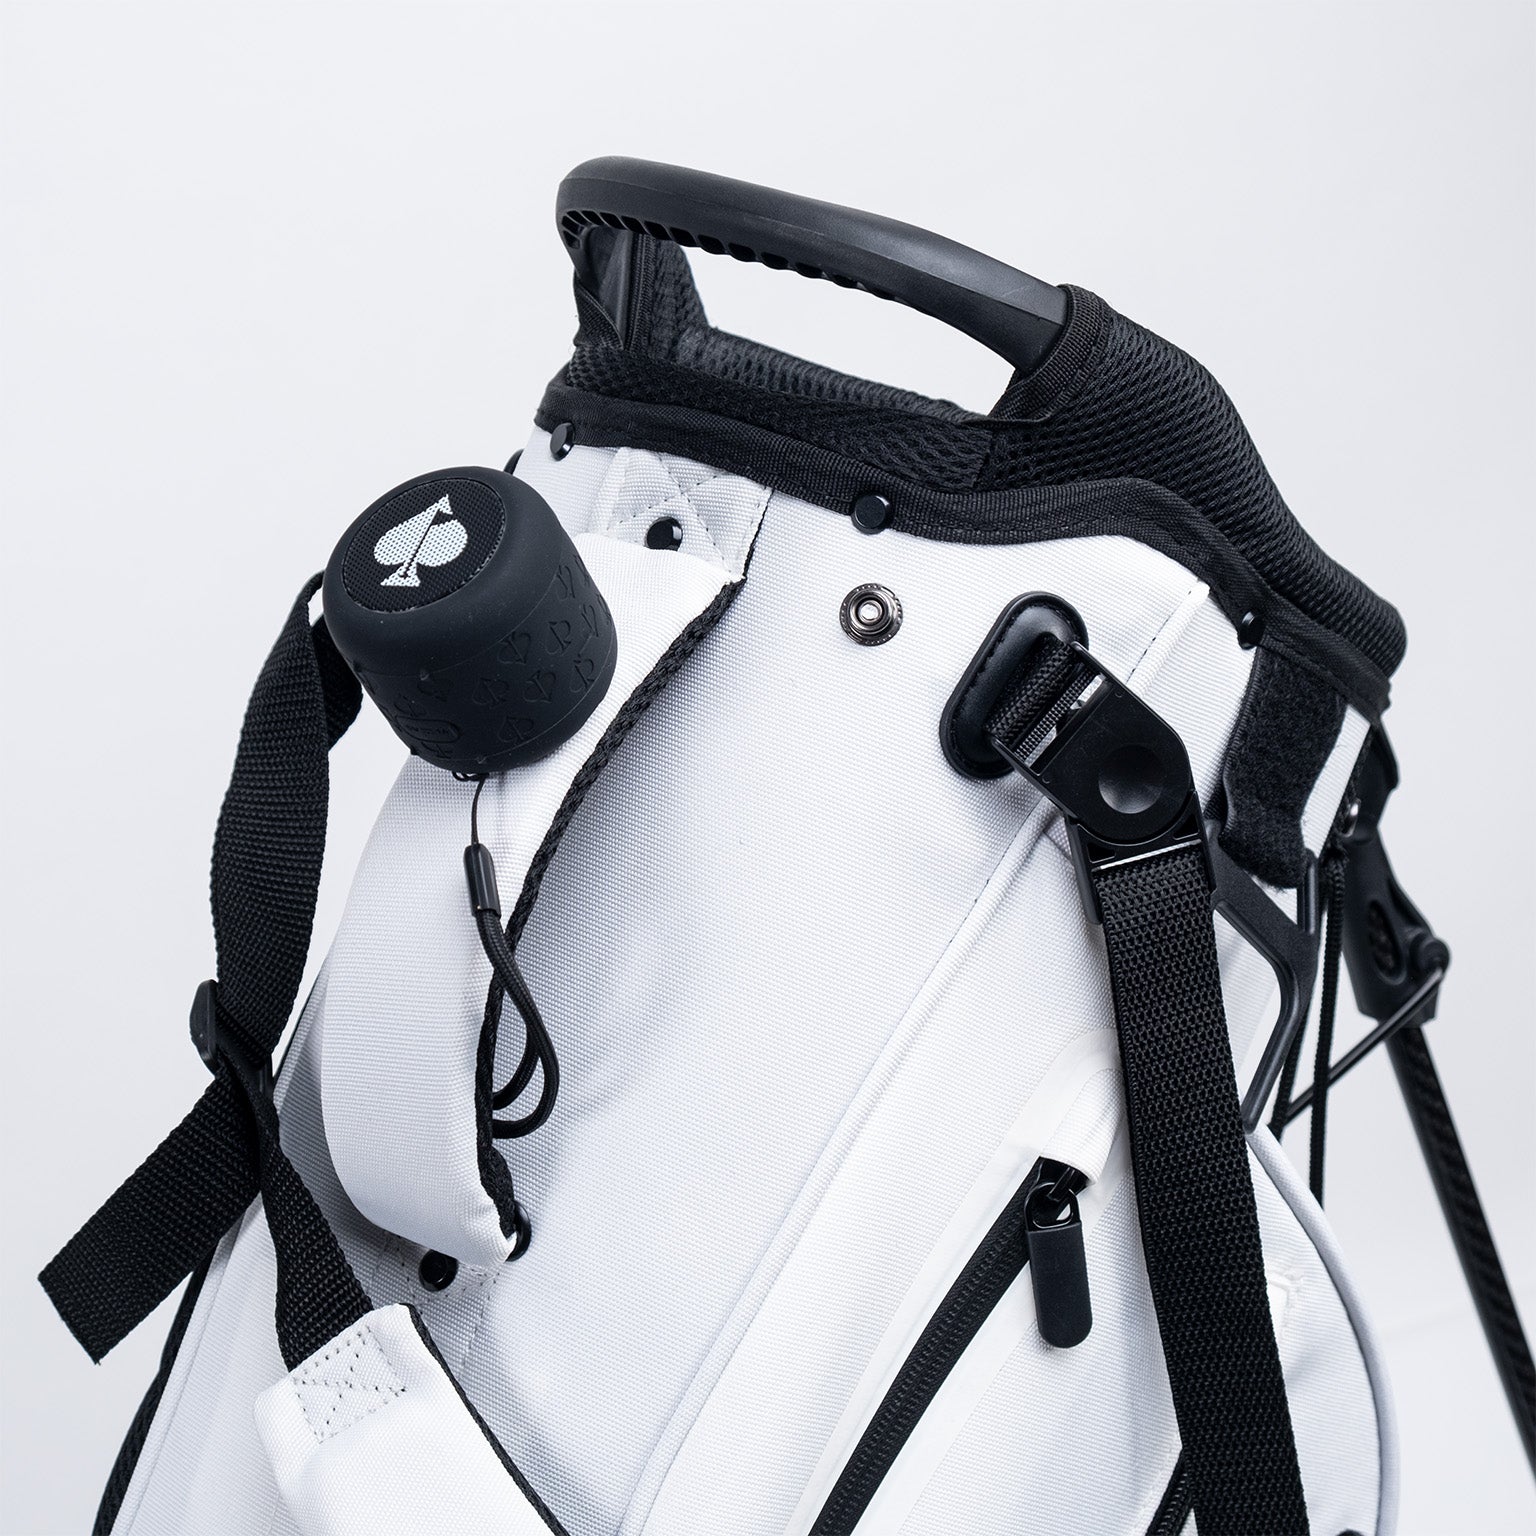 Everyday Carry Bag - White Out